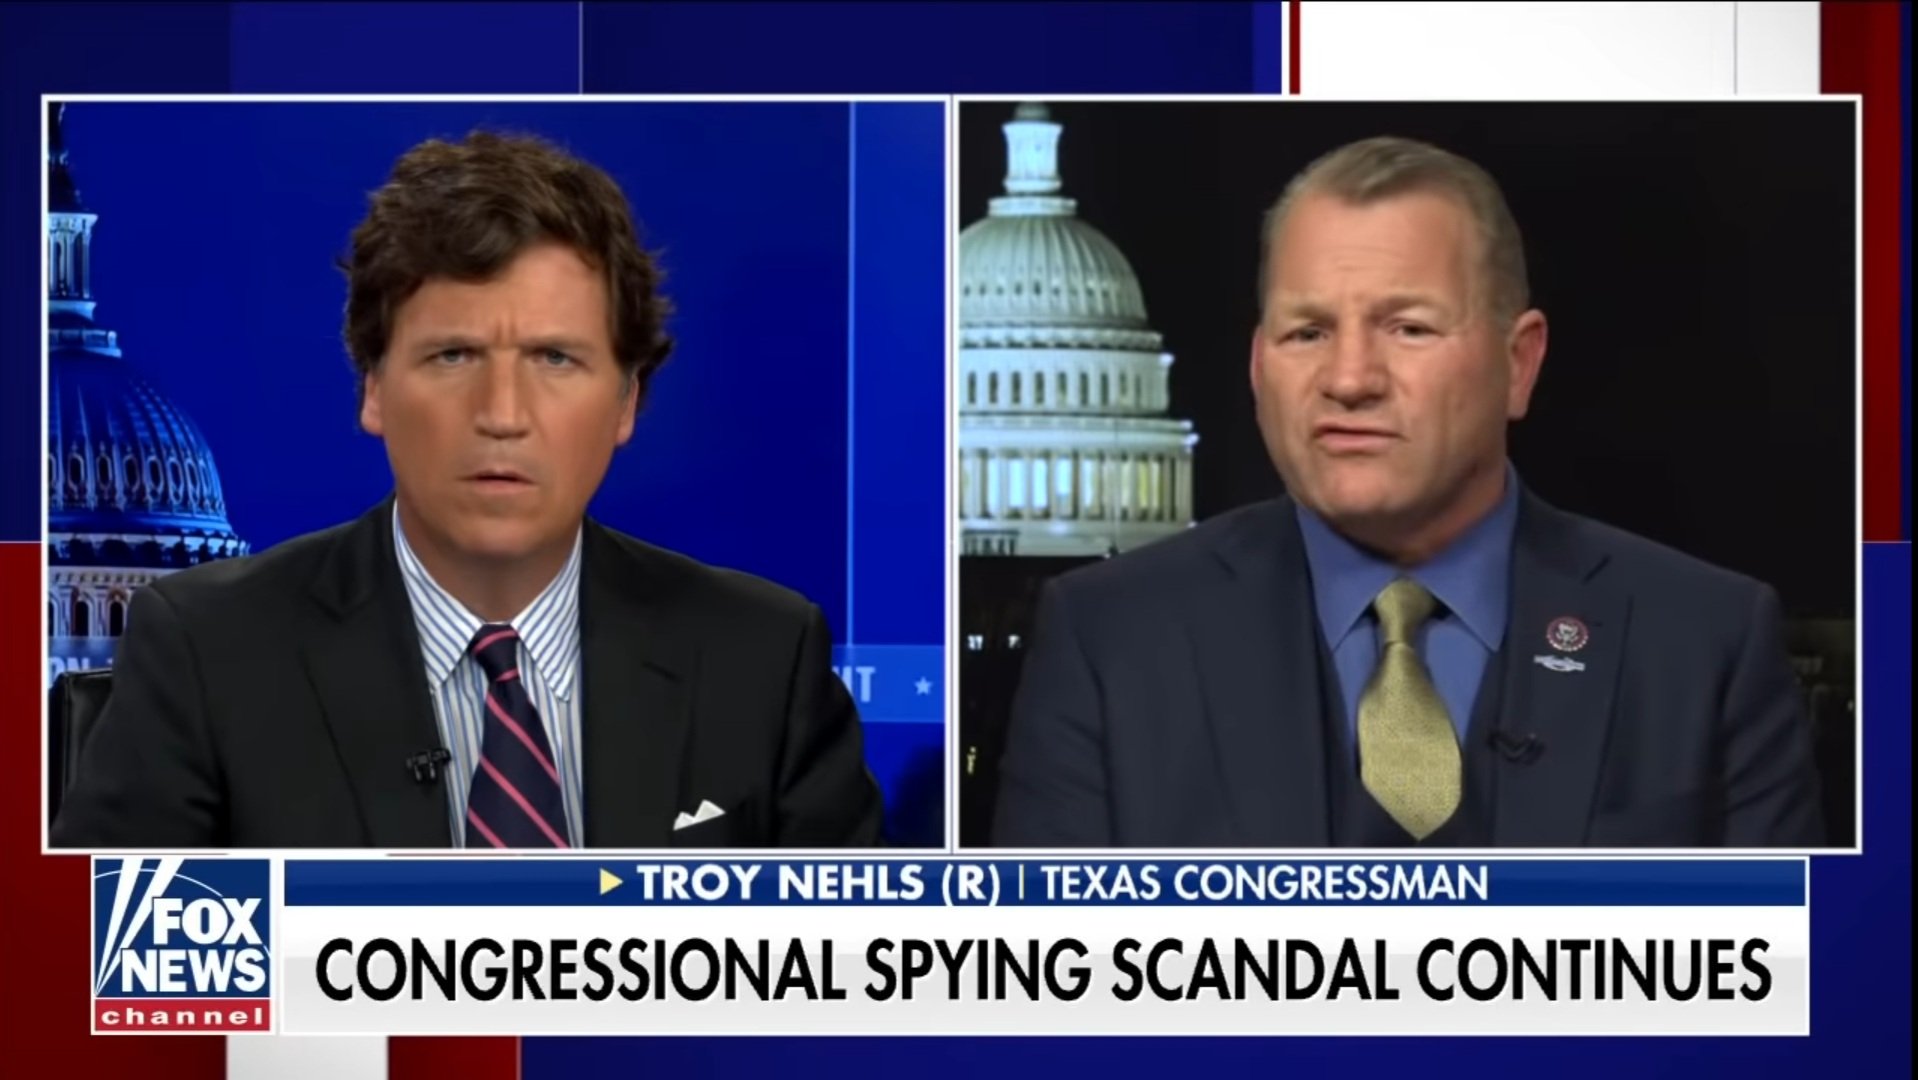  Tucker Carlson and Rep. Troy Nehls SHRED Pelosi’s “Weaponization” of Capitol Hill Police – CPD “Has Become a Secret Police Force that Acts on Behalf of The Democratic Party” – (VIDEO)